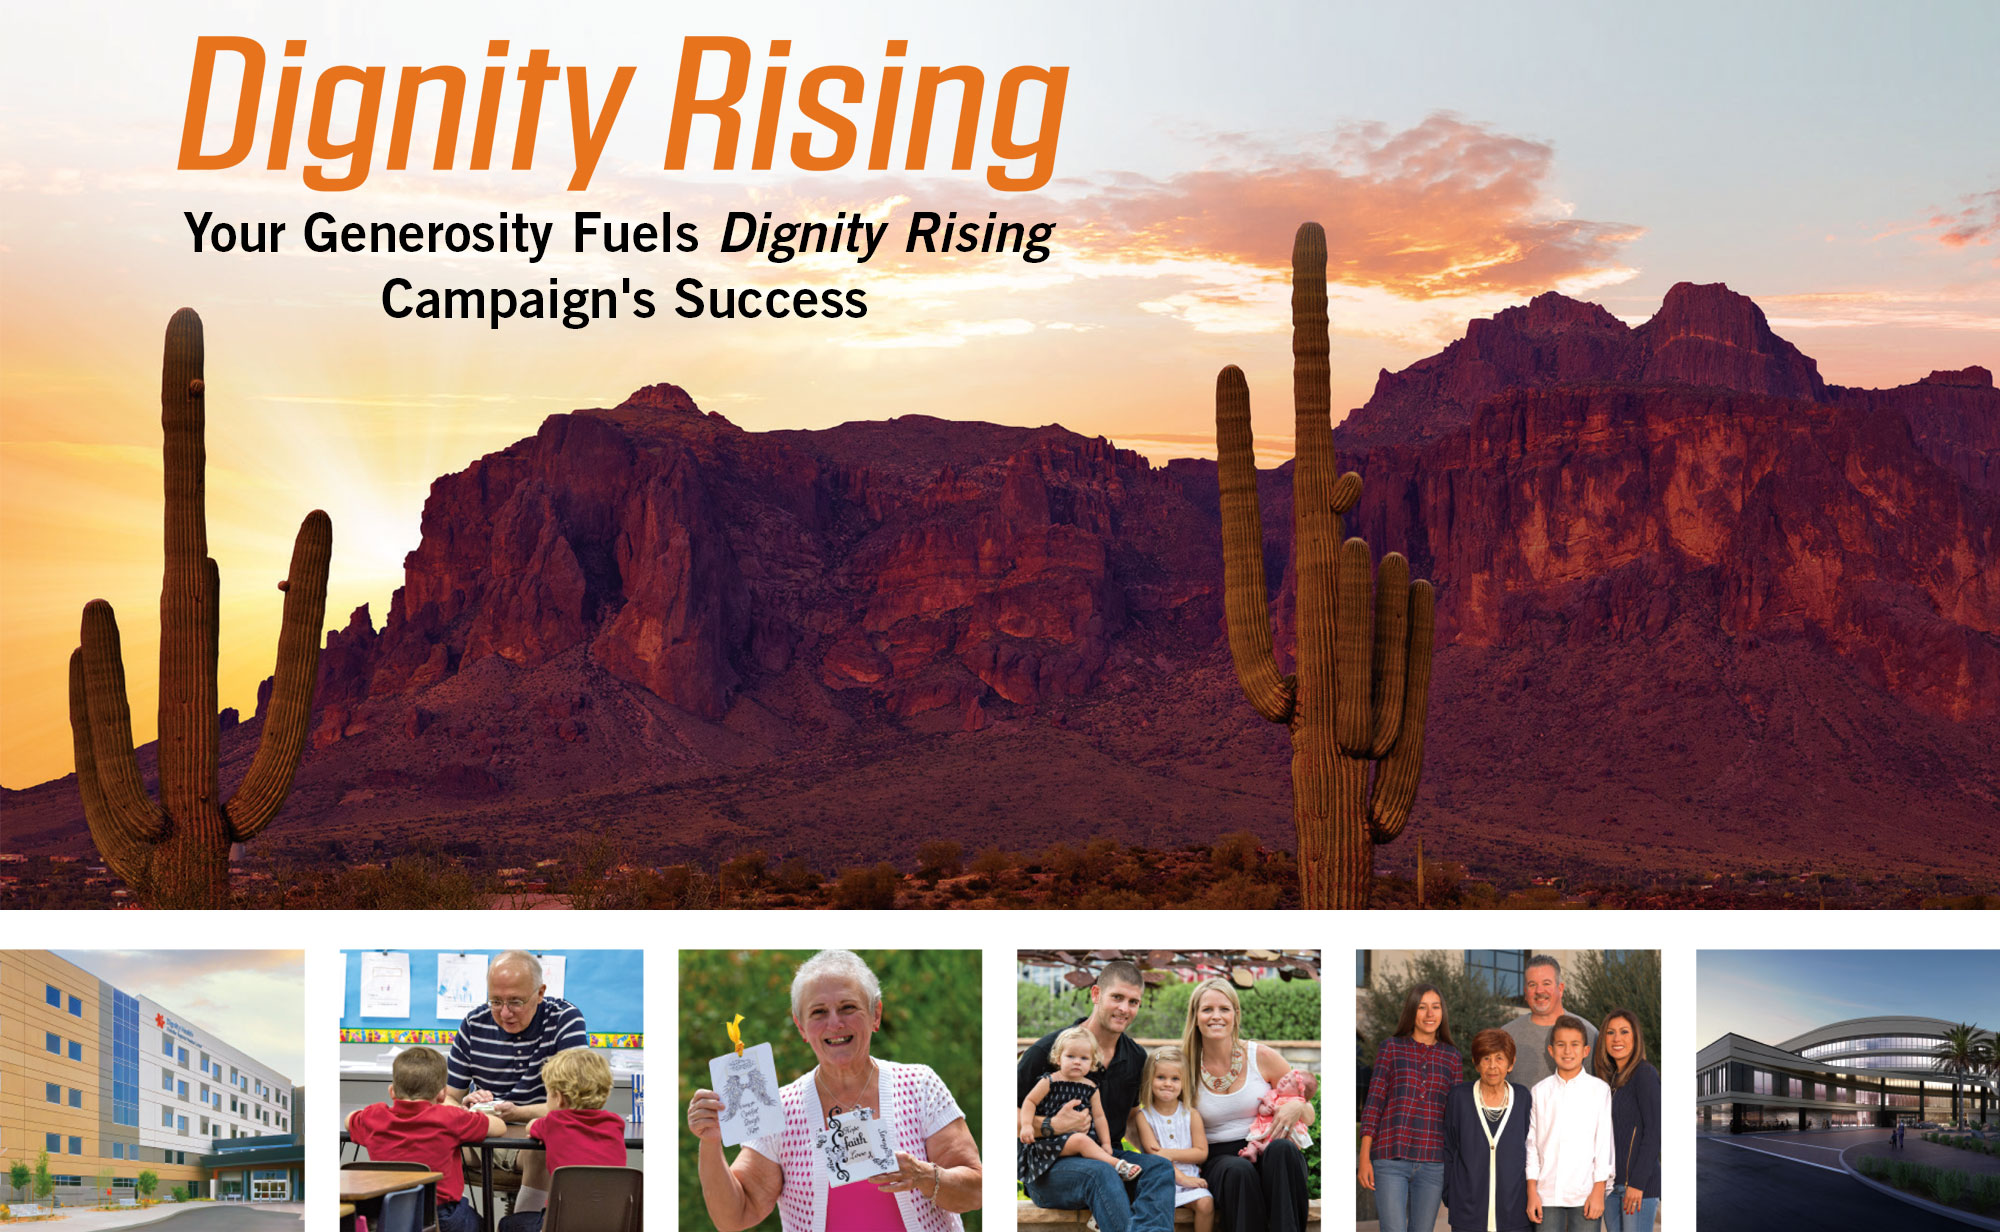 Dignity Rising Close Campaign Top Image of Desert and text